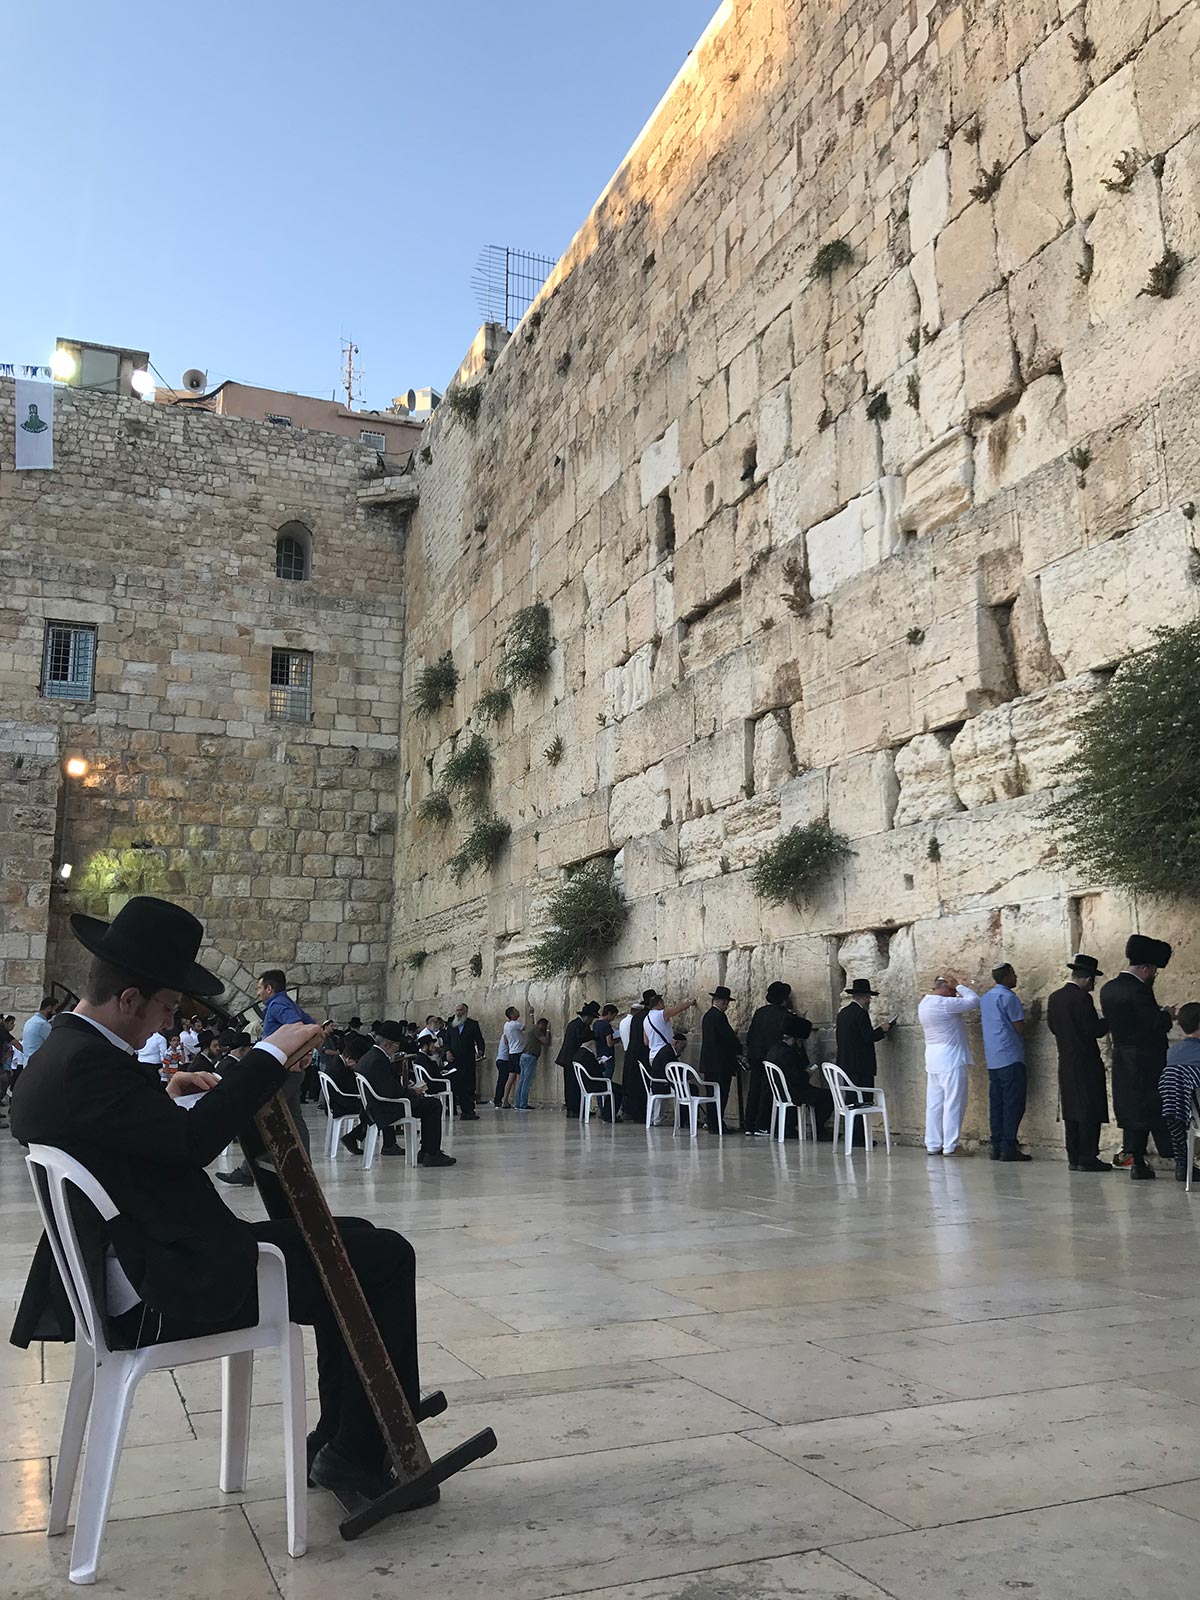 Jews praying at the Western Wall in Jerusalem, Israel. My time in Jerusalem, a special city divided